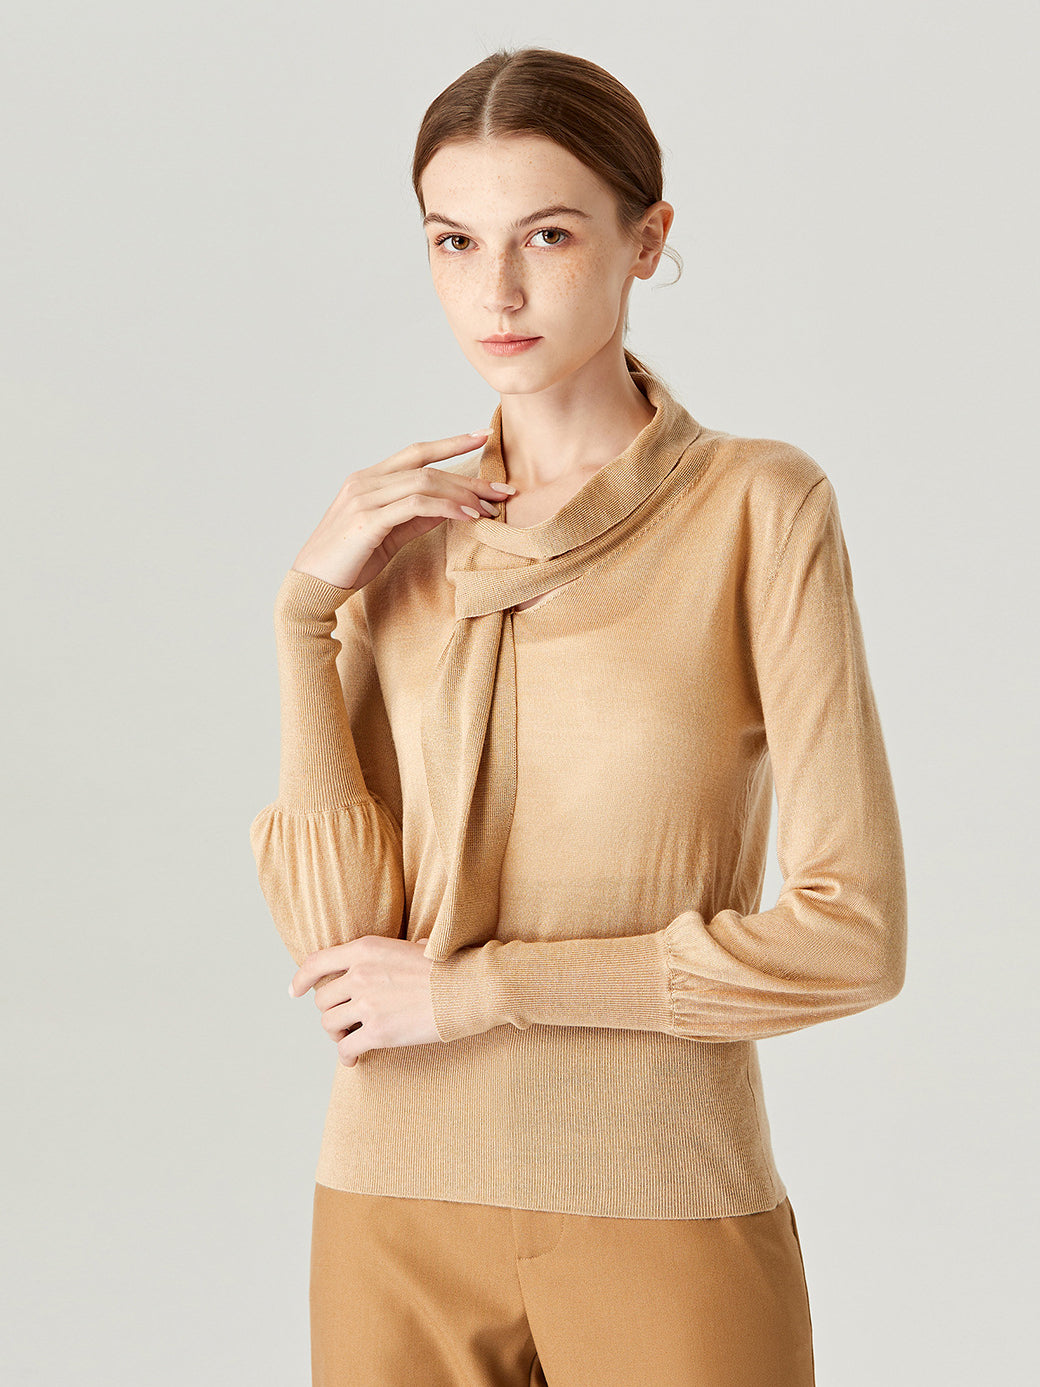 Party Mode Tan Ribbed  Scarf Neckline Sweater Top